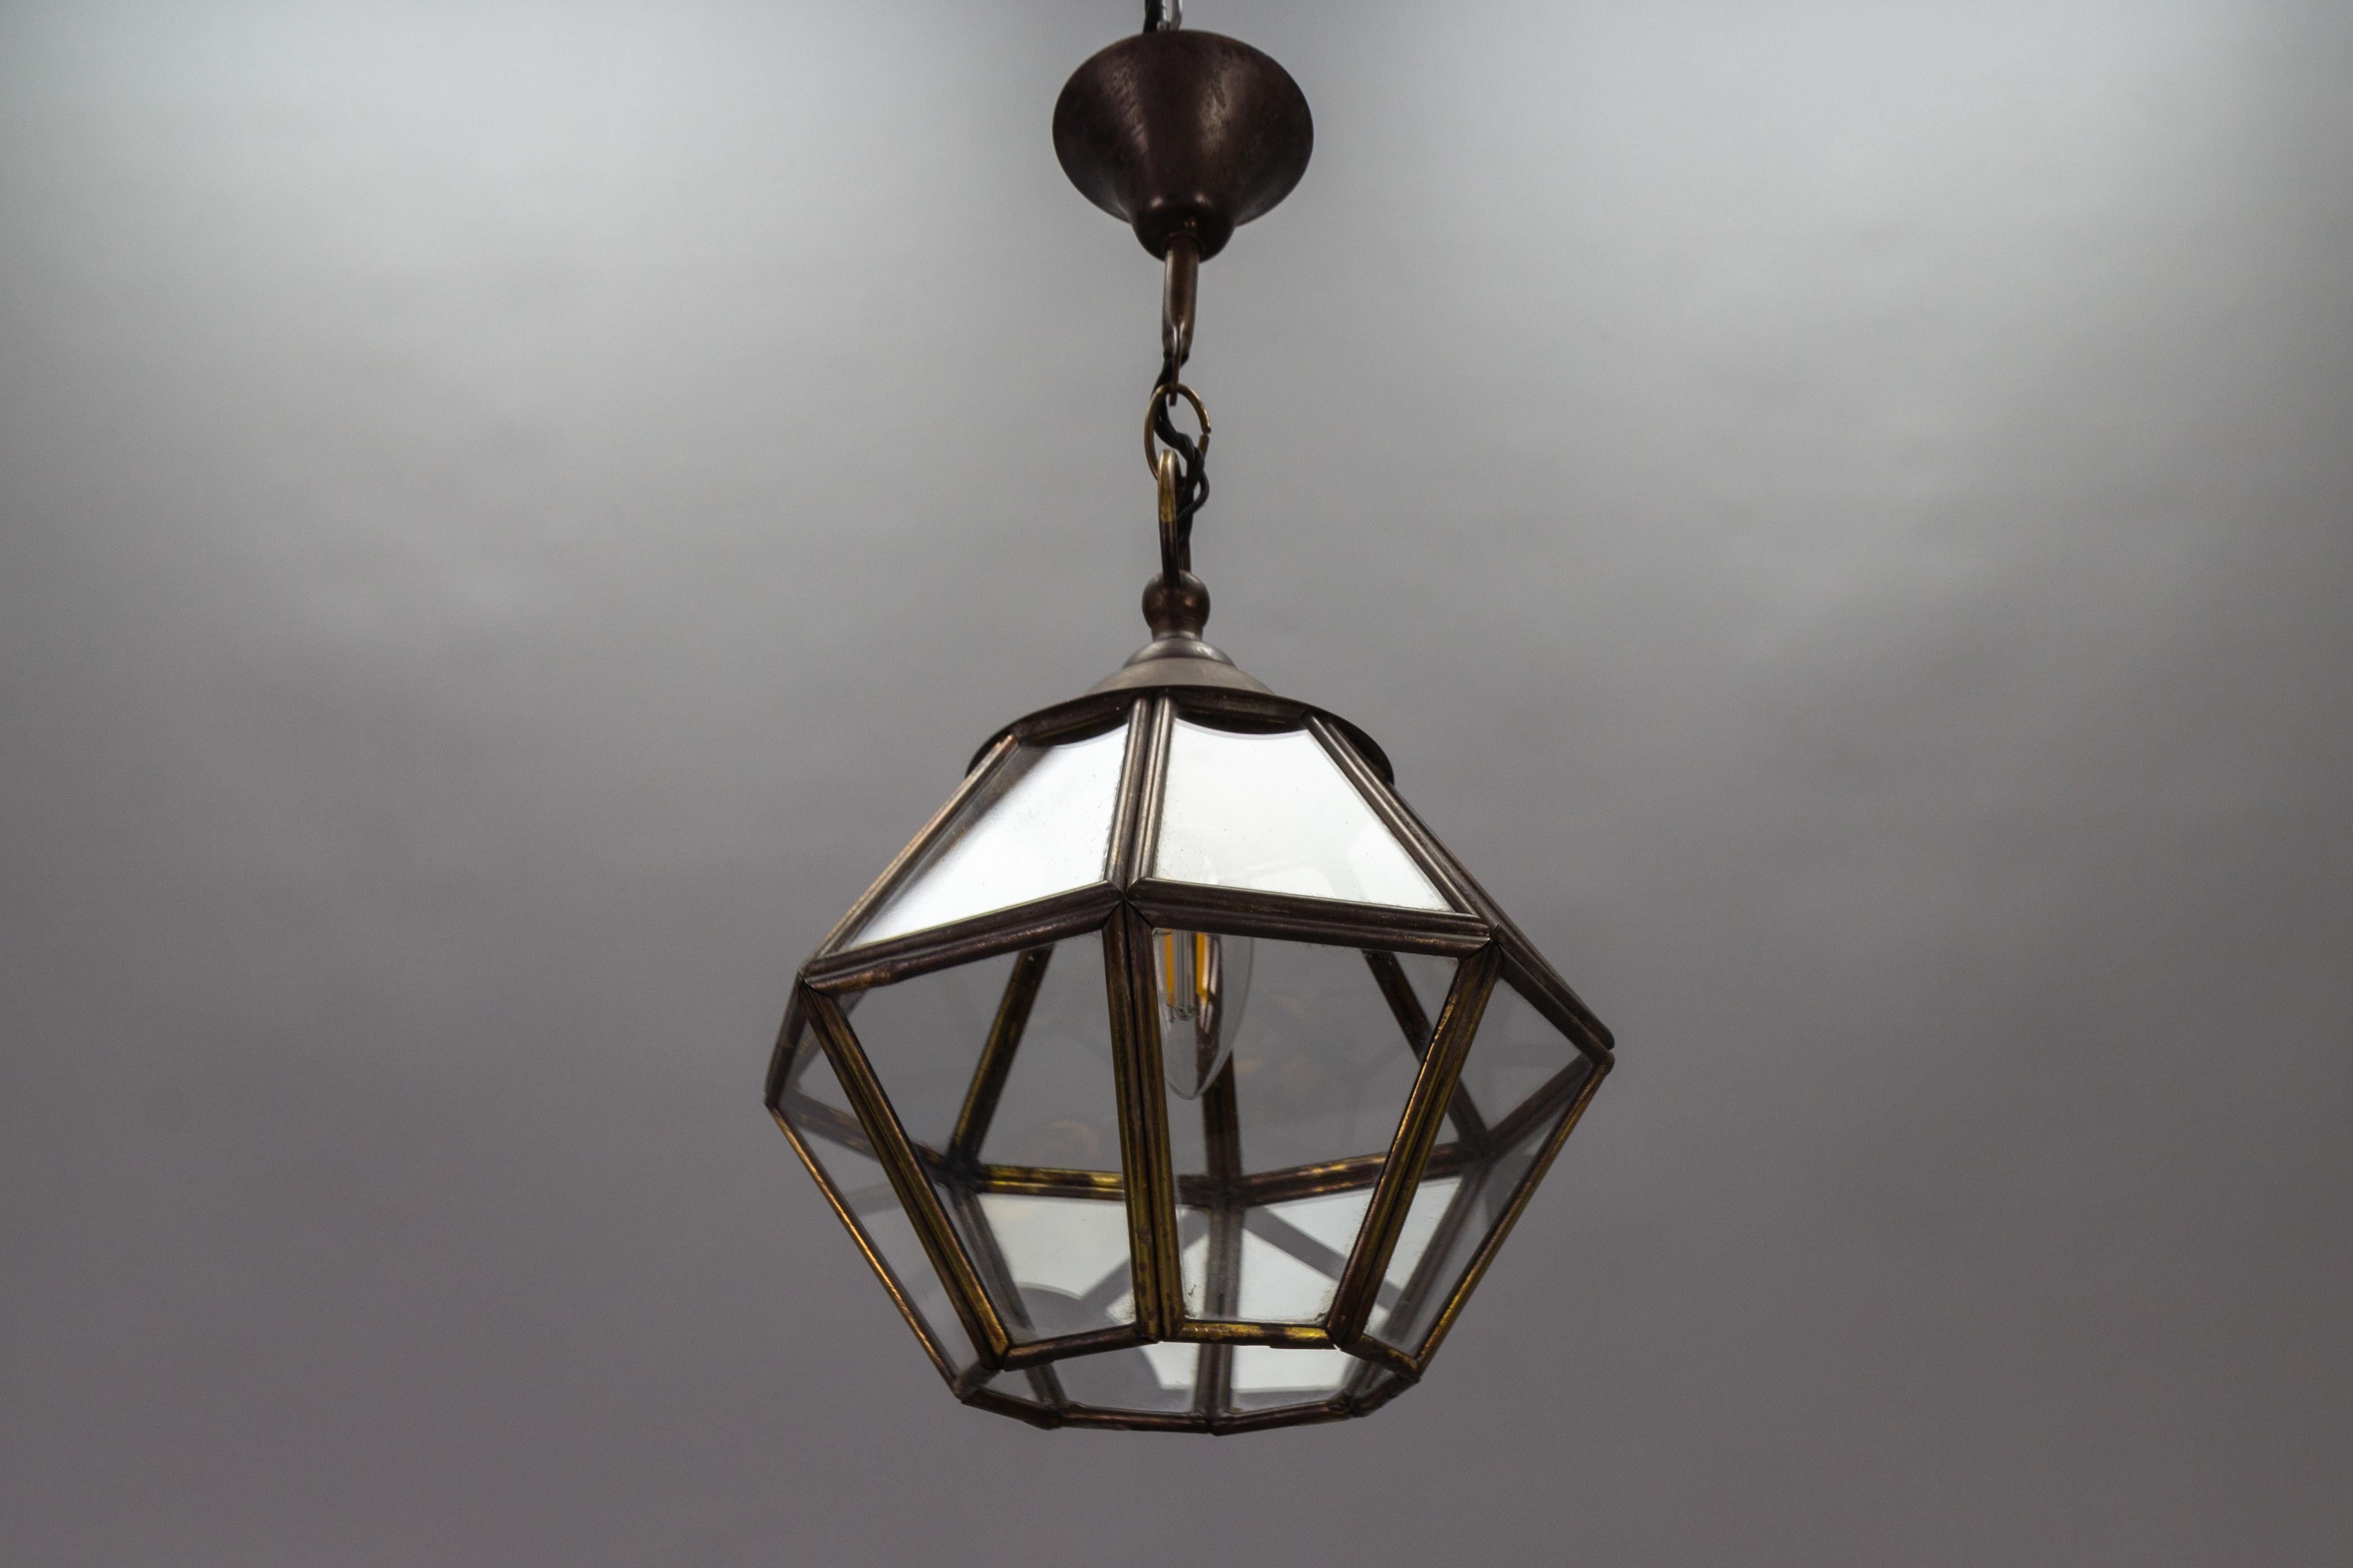 French Midcentury-Modern Brass and Clear Glass Octagonal Hanging Lantern For Sale 6